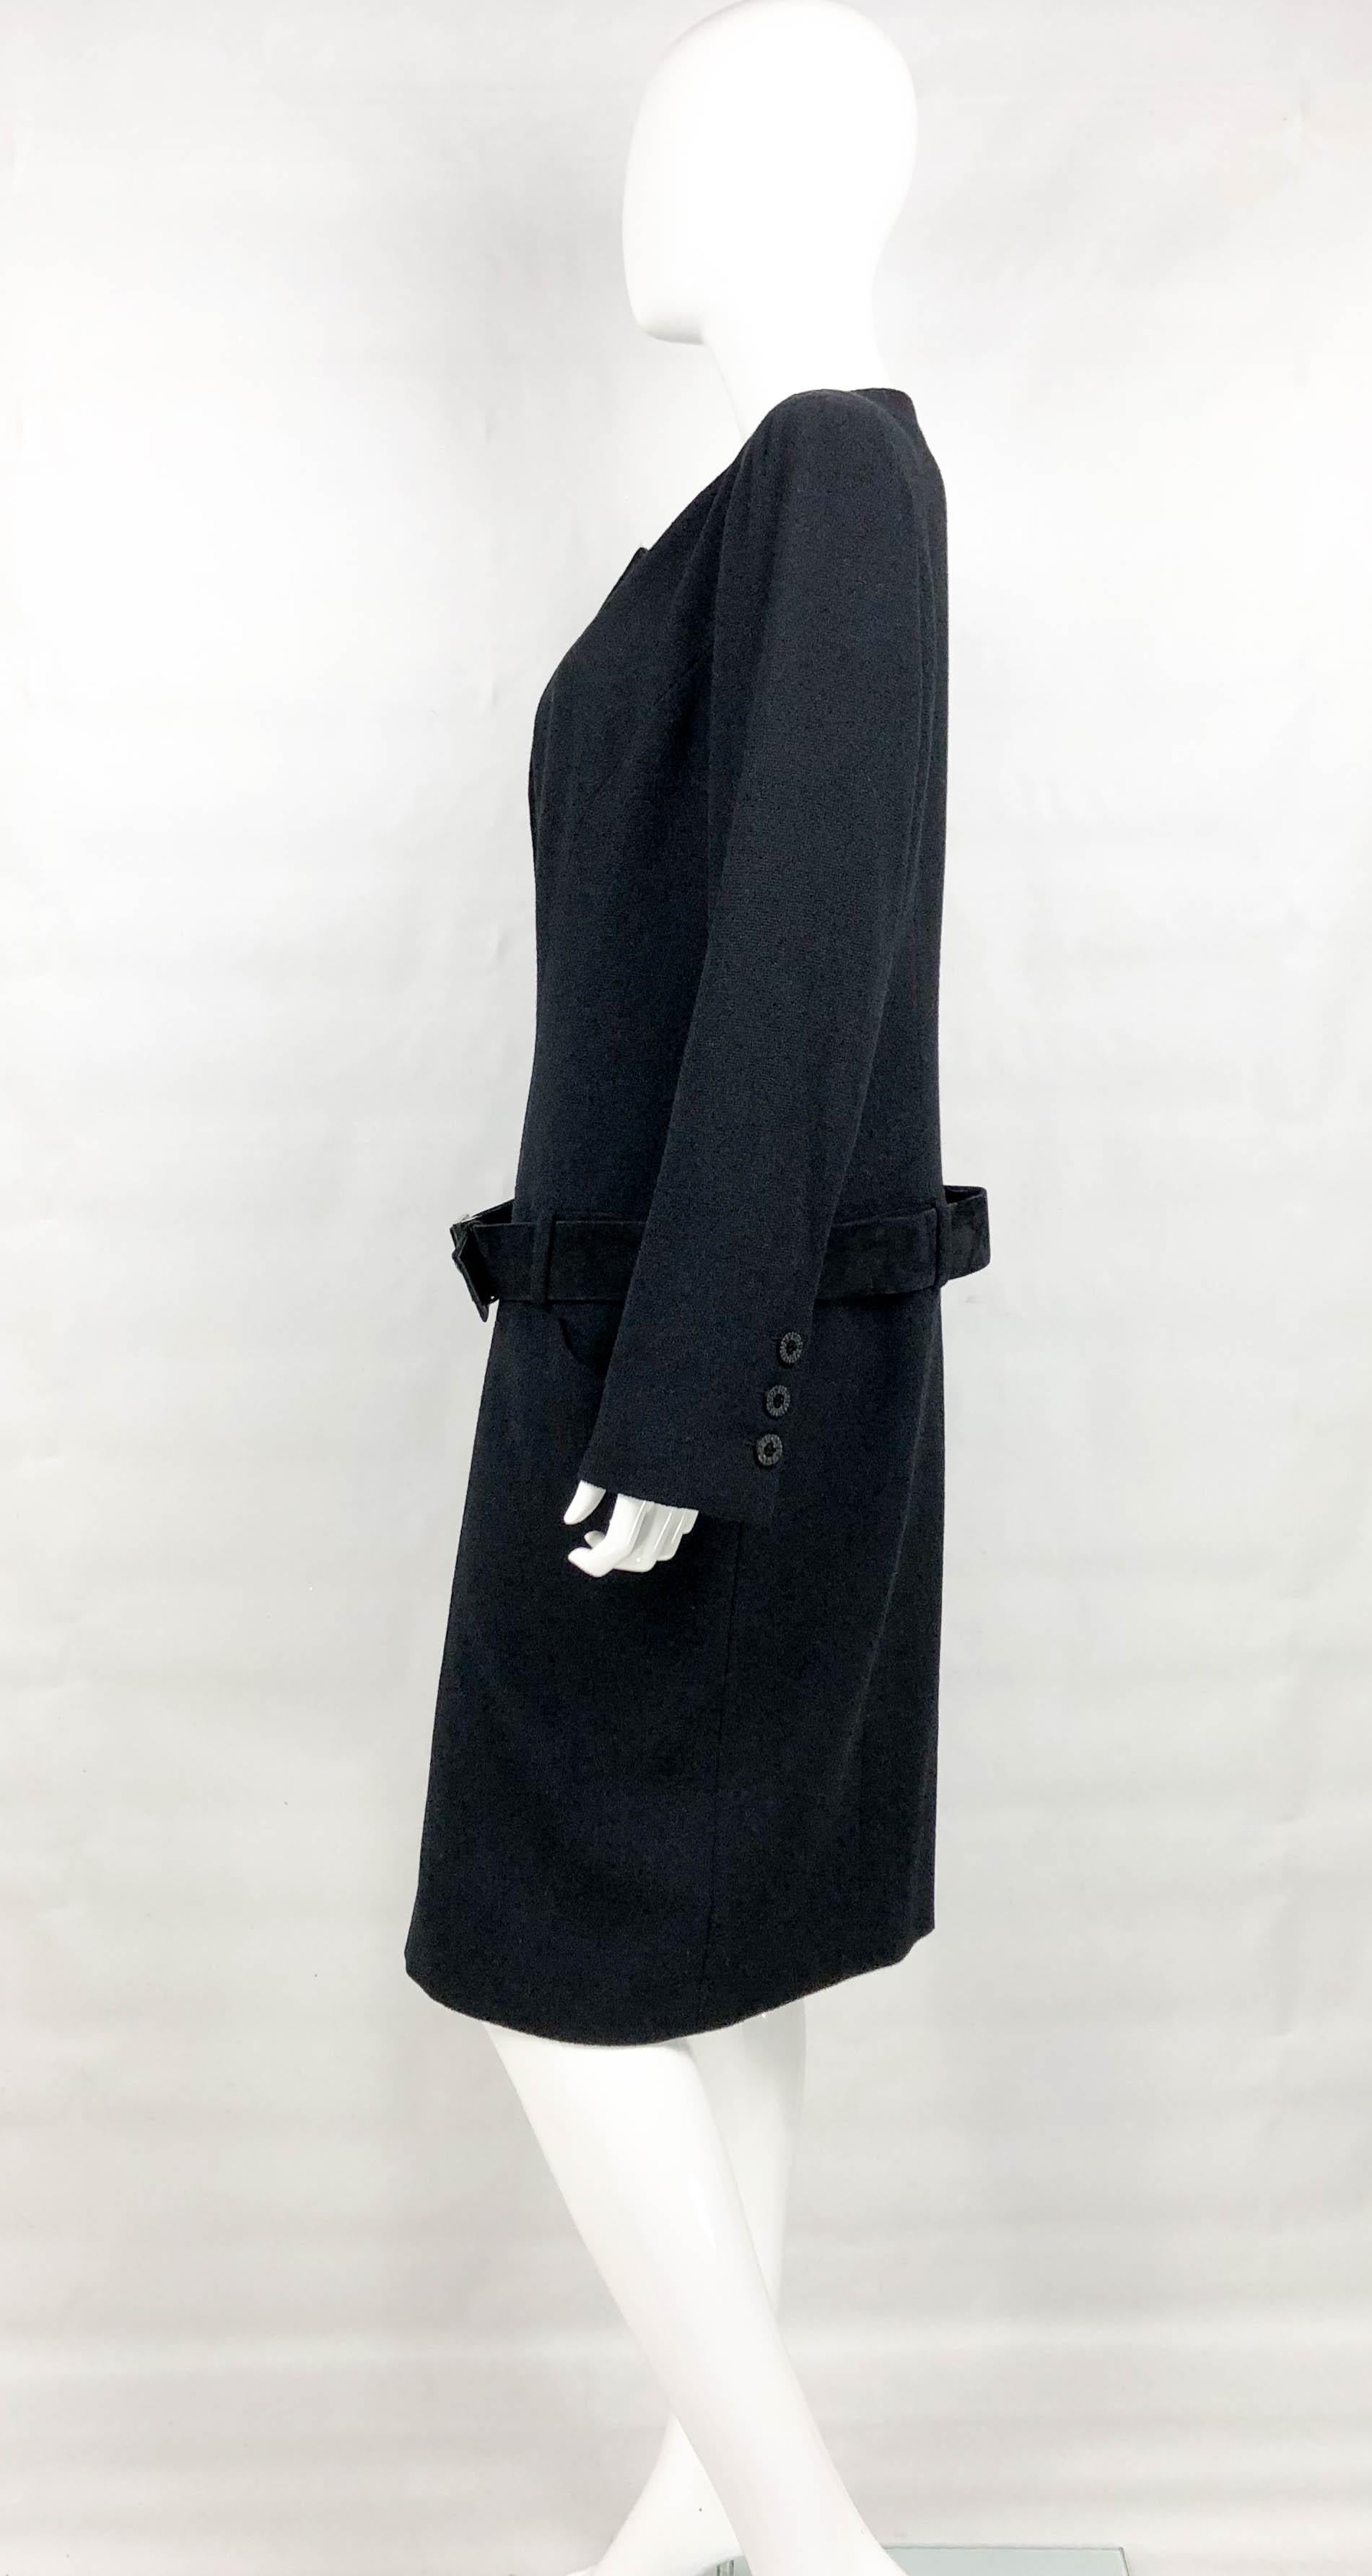 2009 Chanel Runway Look Black Wool Belted Dress / Coat (Large Size) For Sale 3